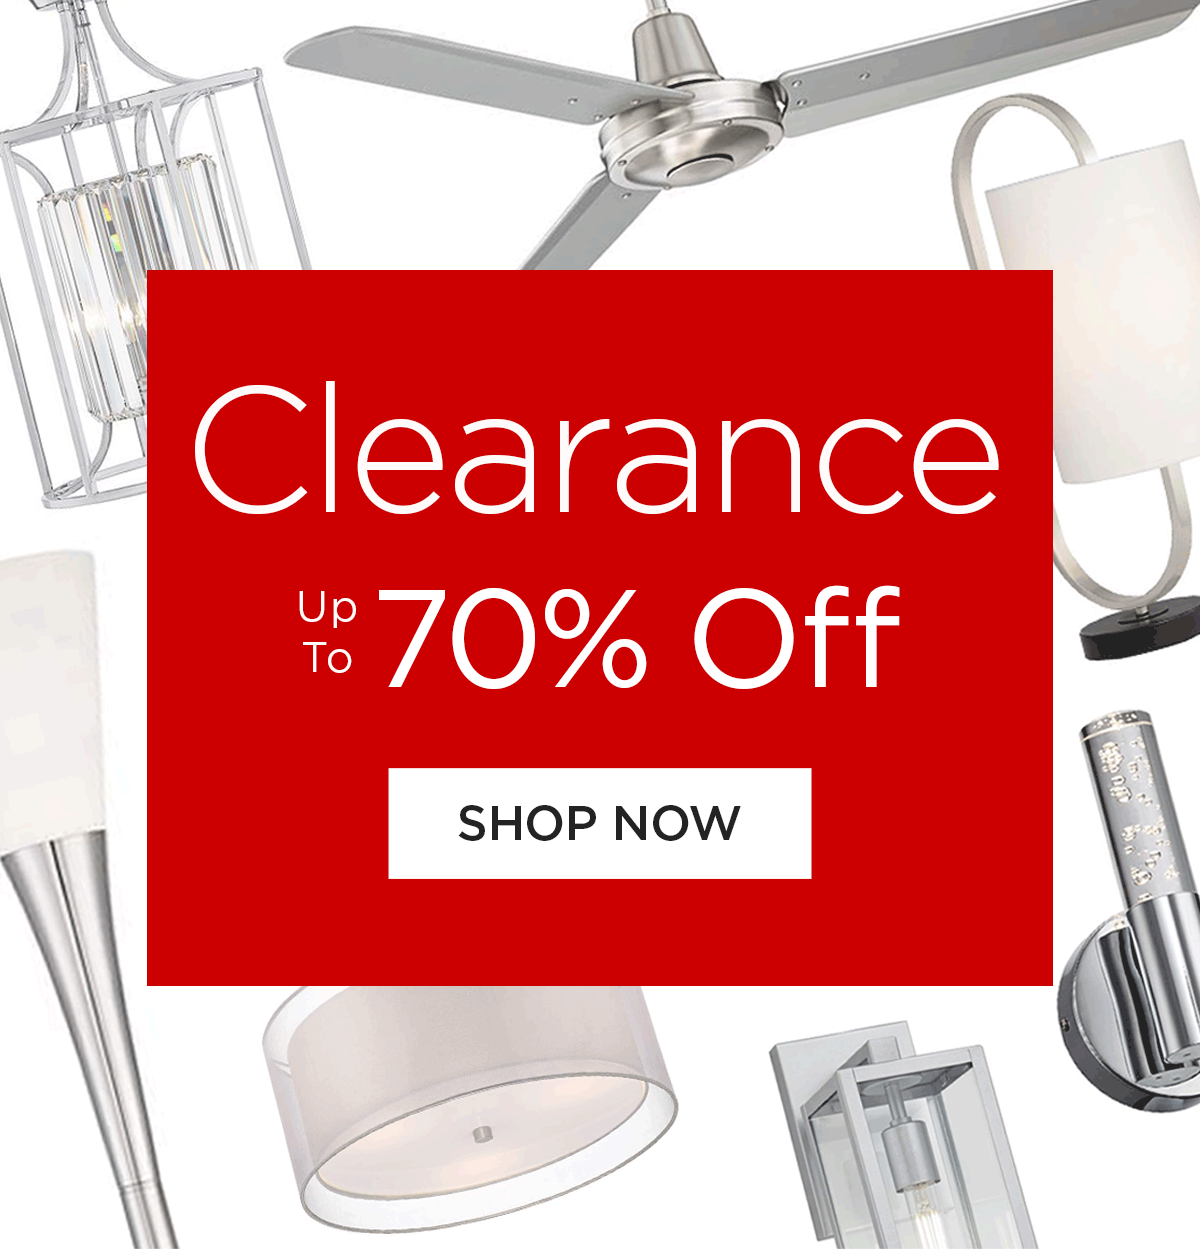 Clearance - Up to 70% Off - Shop Now